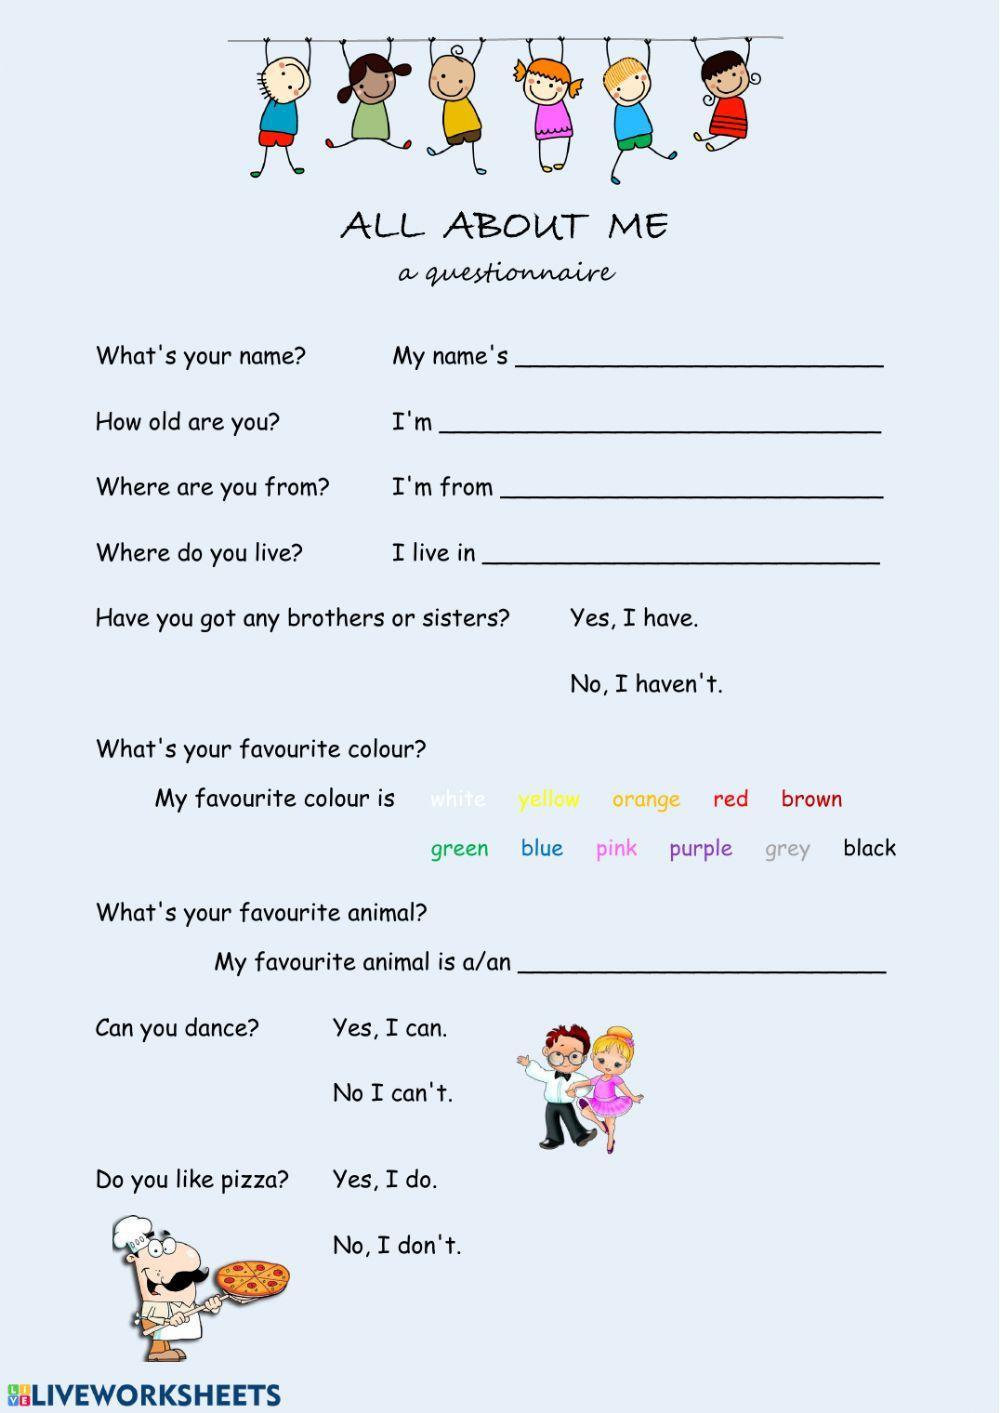 All About Me QUESTIONNAIRE